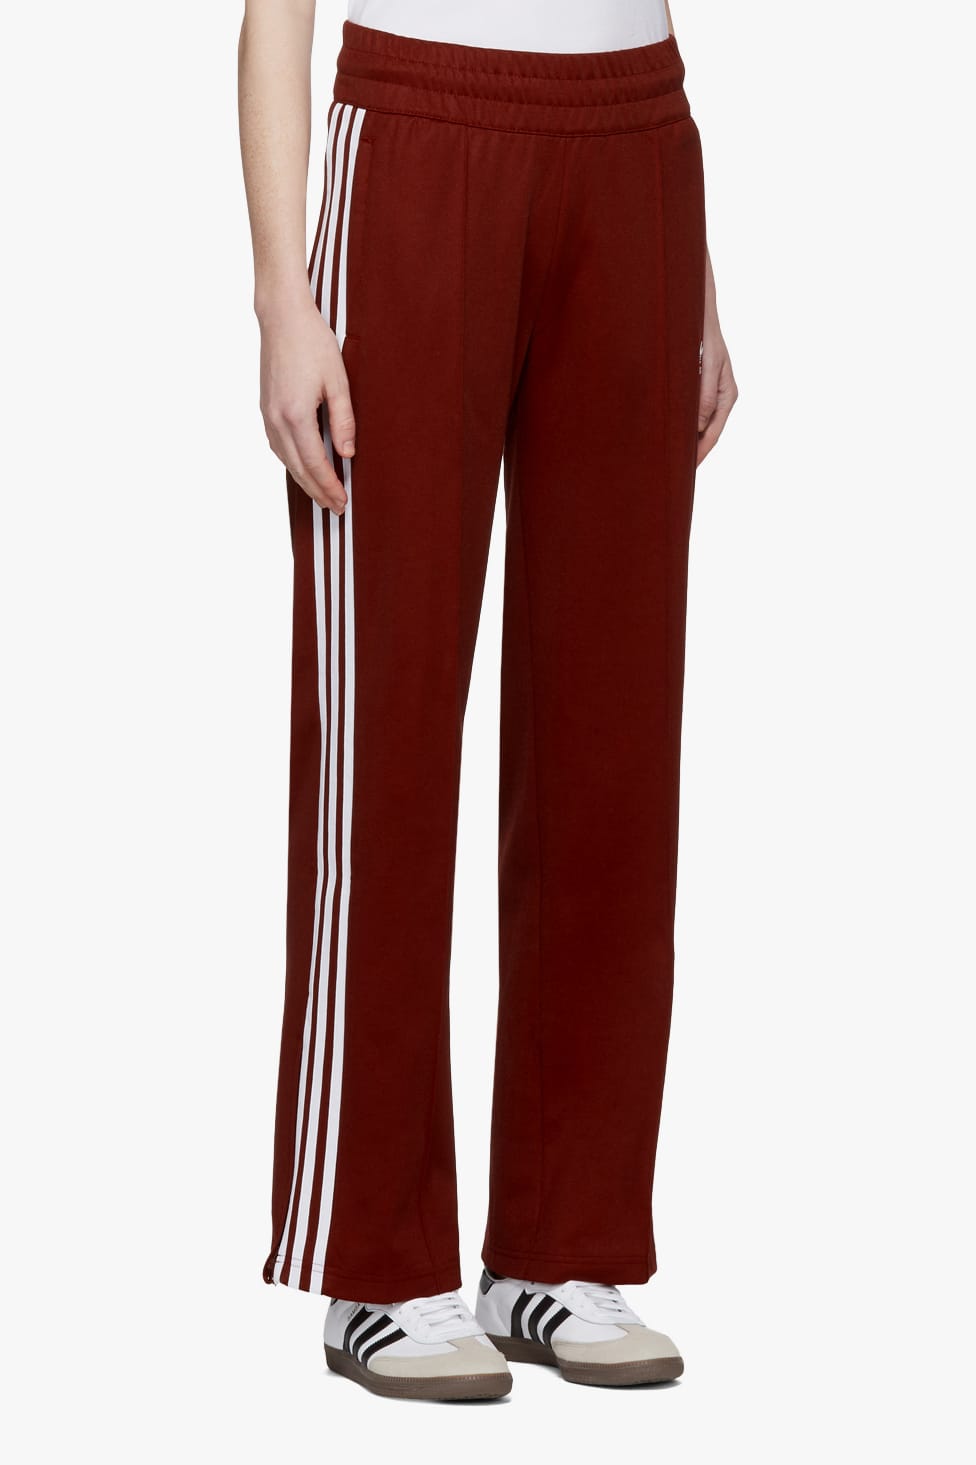 adidas first copy track pants